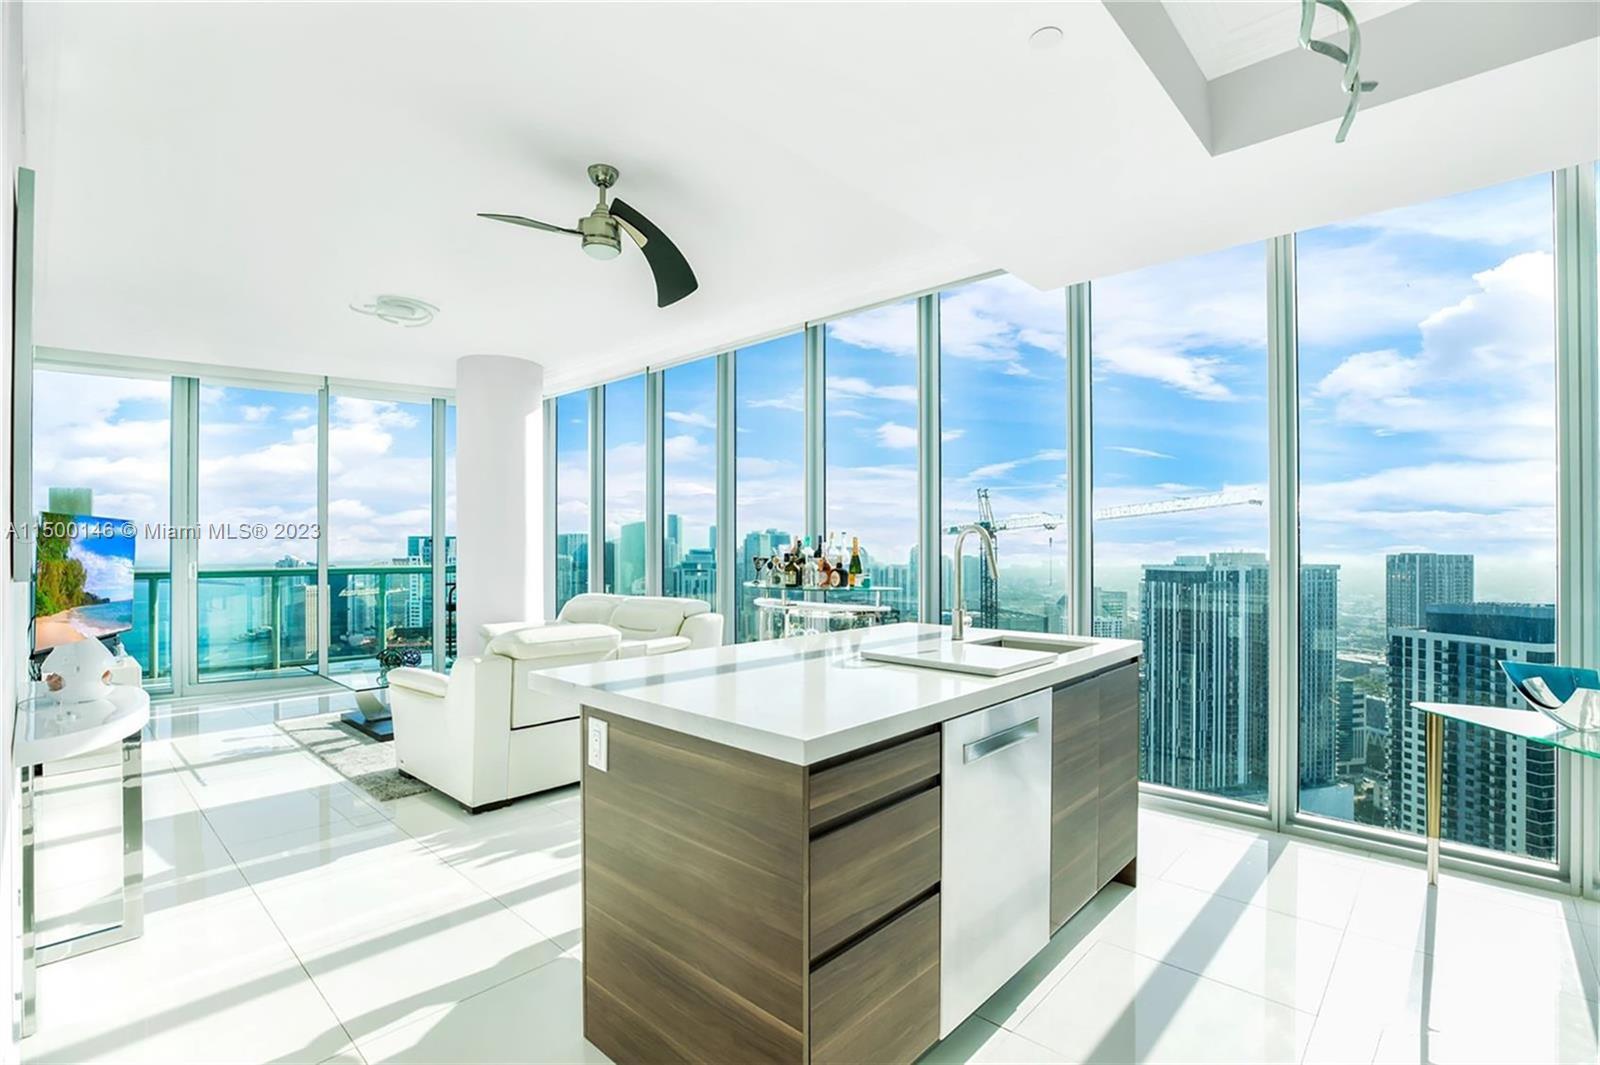 Step into this stunning 2 Bed condominium situated in the 01 line on the 53rd floor.. Captivating views span across the Miami skyline and provide direct ocean perspectives of Biscayne Bay, Miami Beach, as well as the dazzling city lights of Brickell and the Miami World Center. Positioned at the southeast pinnacle of the building, Line 01 holds the coveted status of being the most sought-after within Marina Blue. This unit underwent a comprehensive transformation, featuring brand-new crown molding & fully renovated kitchen boasts top-of-the-line Bosch appliances, quartz backsplash, new cabinets, and includes a $1,500 Woodbridge toilet bidet in the master bathroom. Additional highlights comprise built-in closets, all-electric switches, and custom lighting installations!